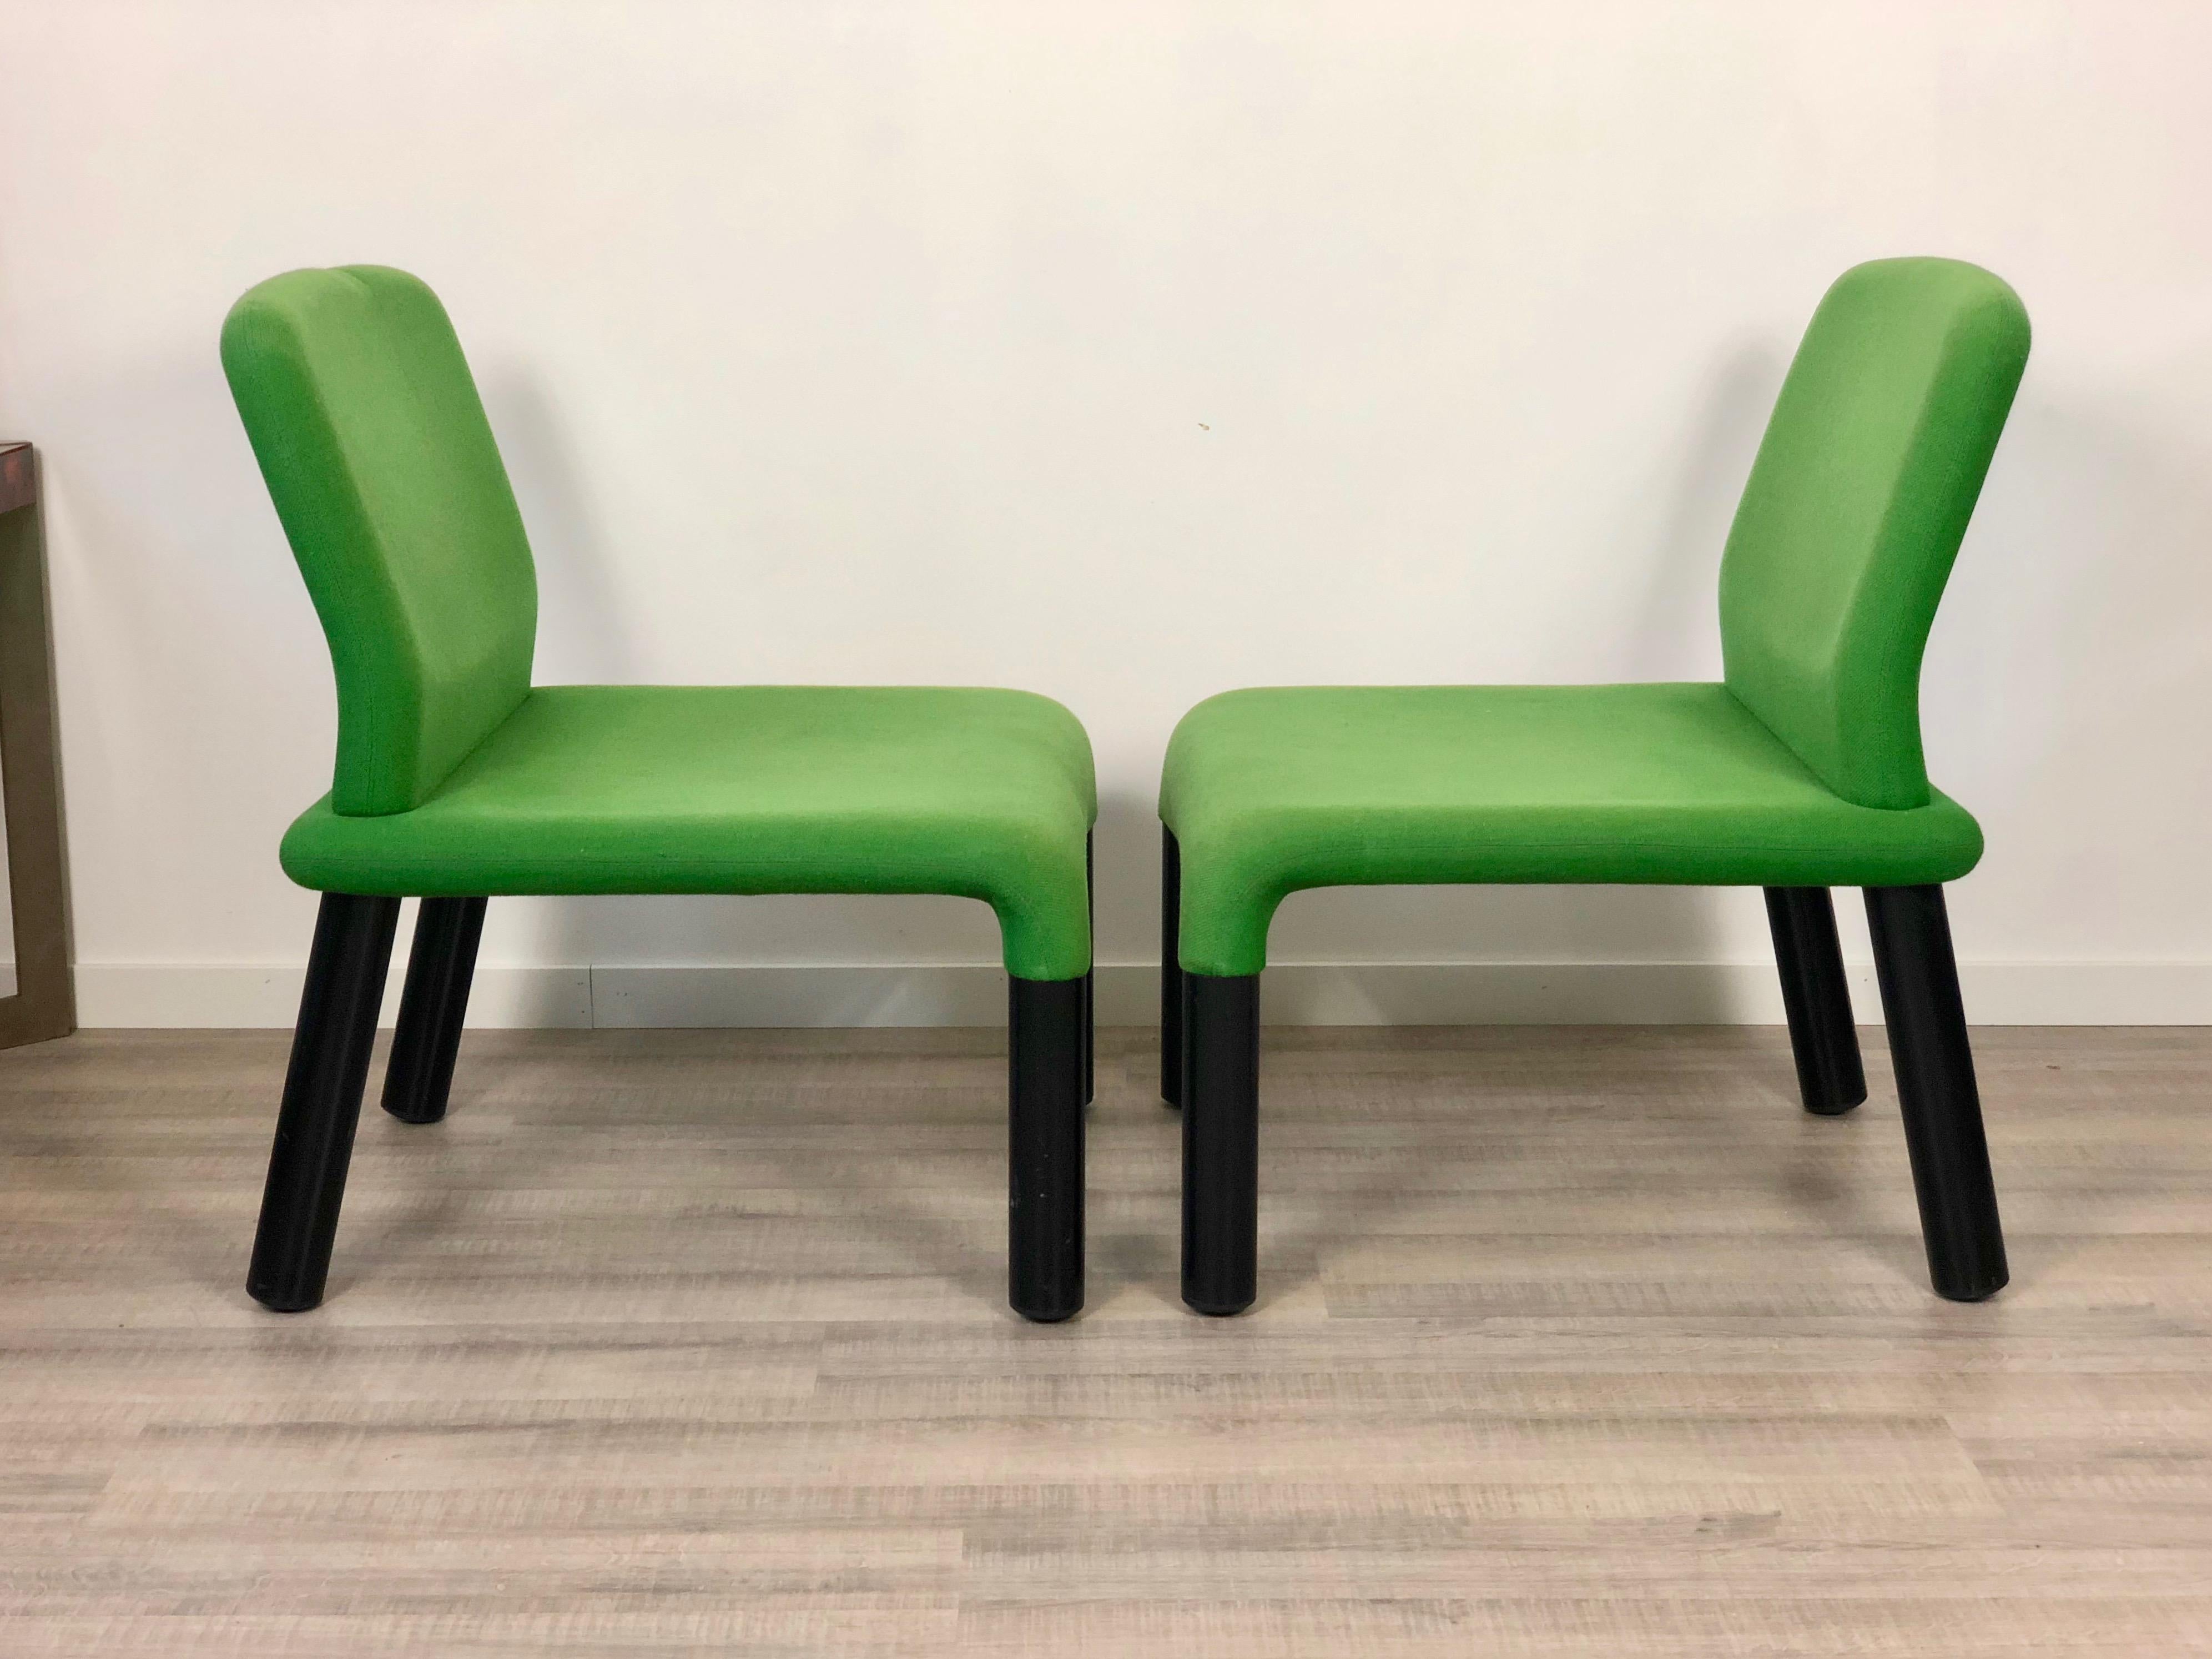 Pair of Green Armchair in Plastic Fabric, Italy, 1970s In Good Condition For Sale In Rome, IT